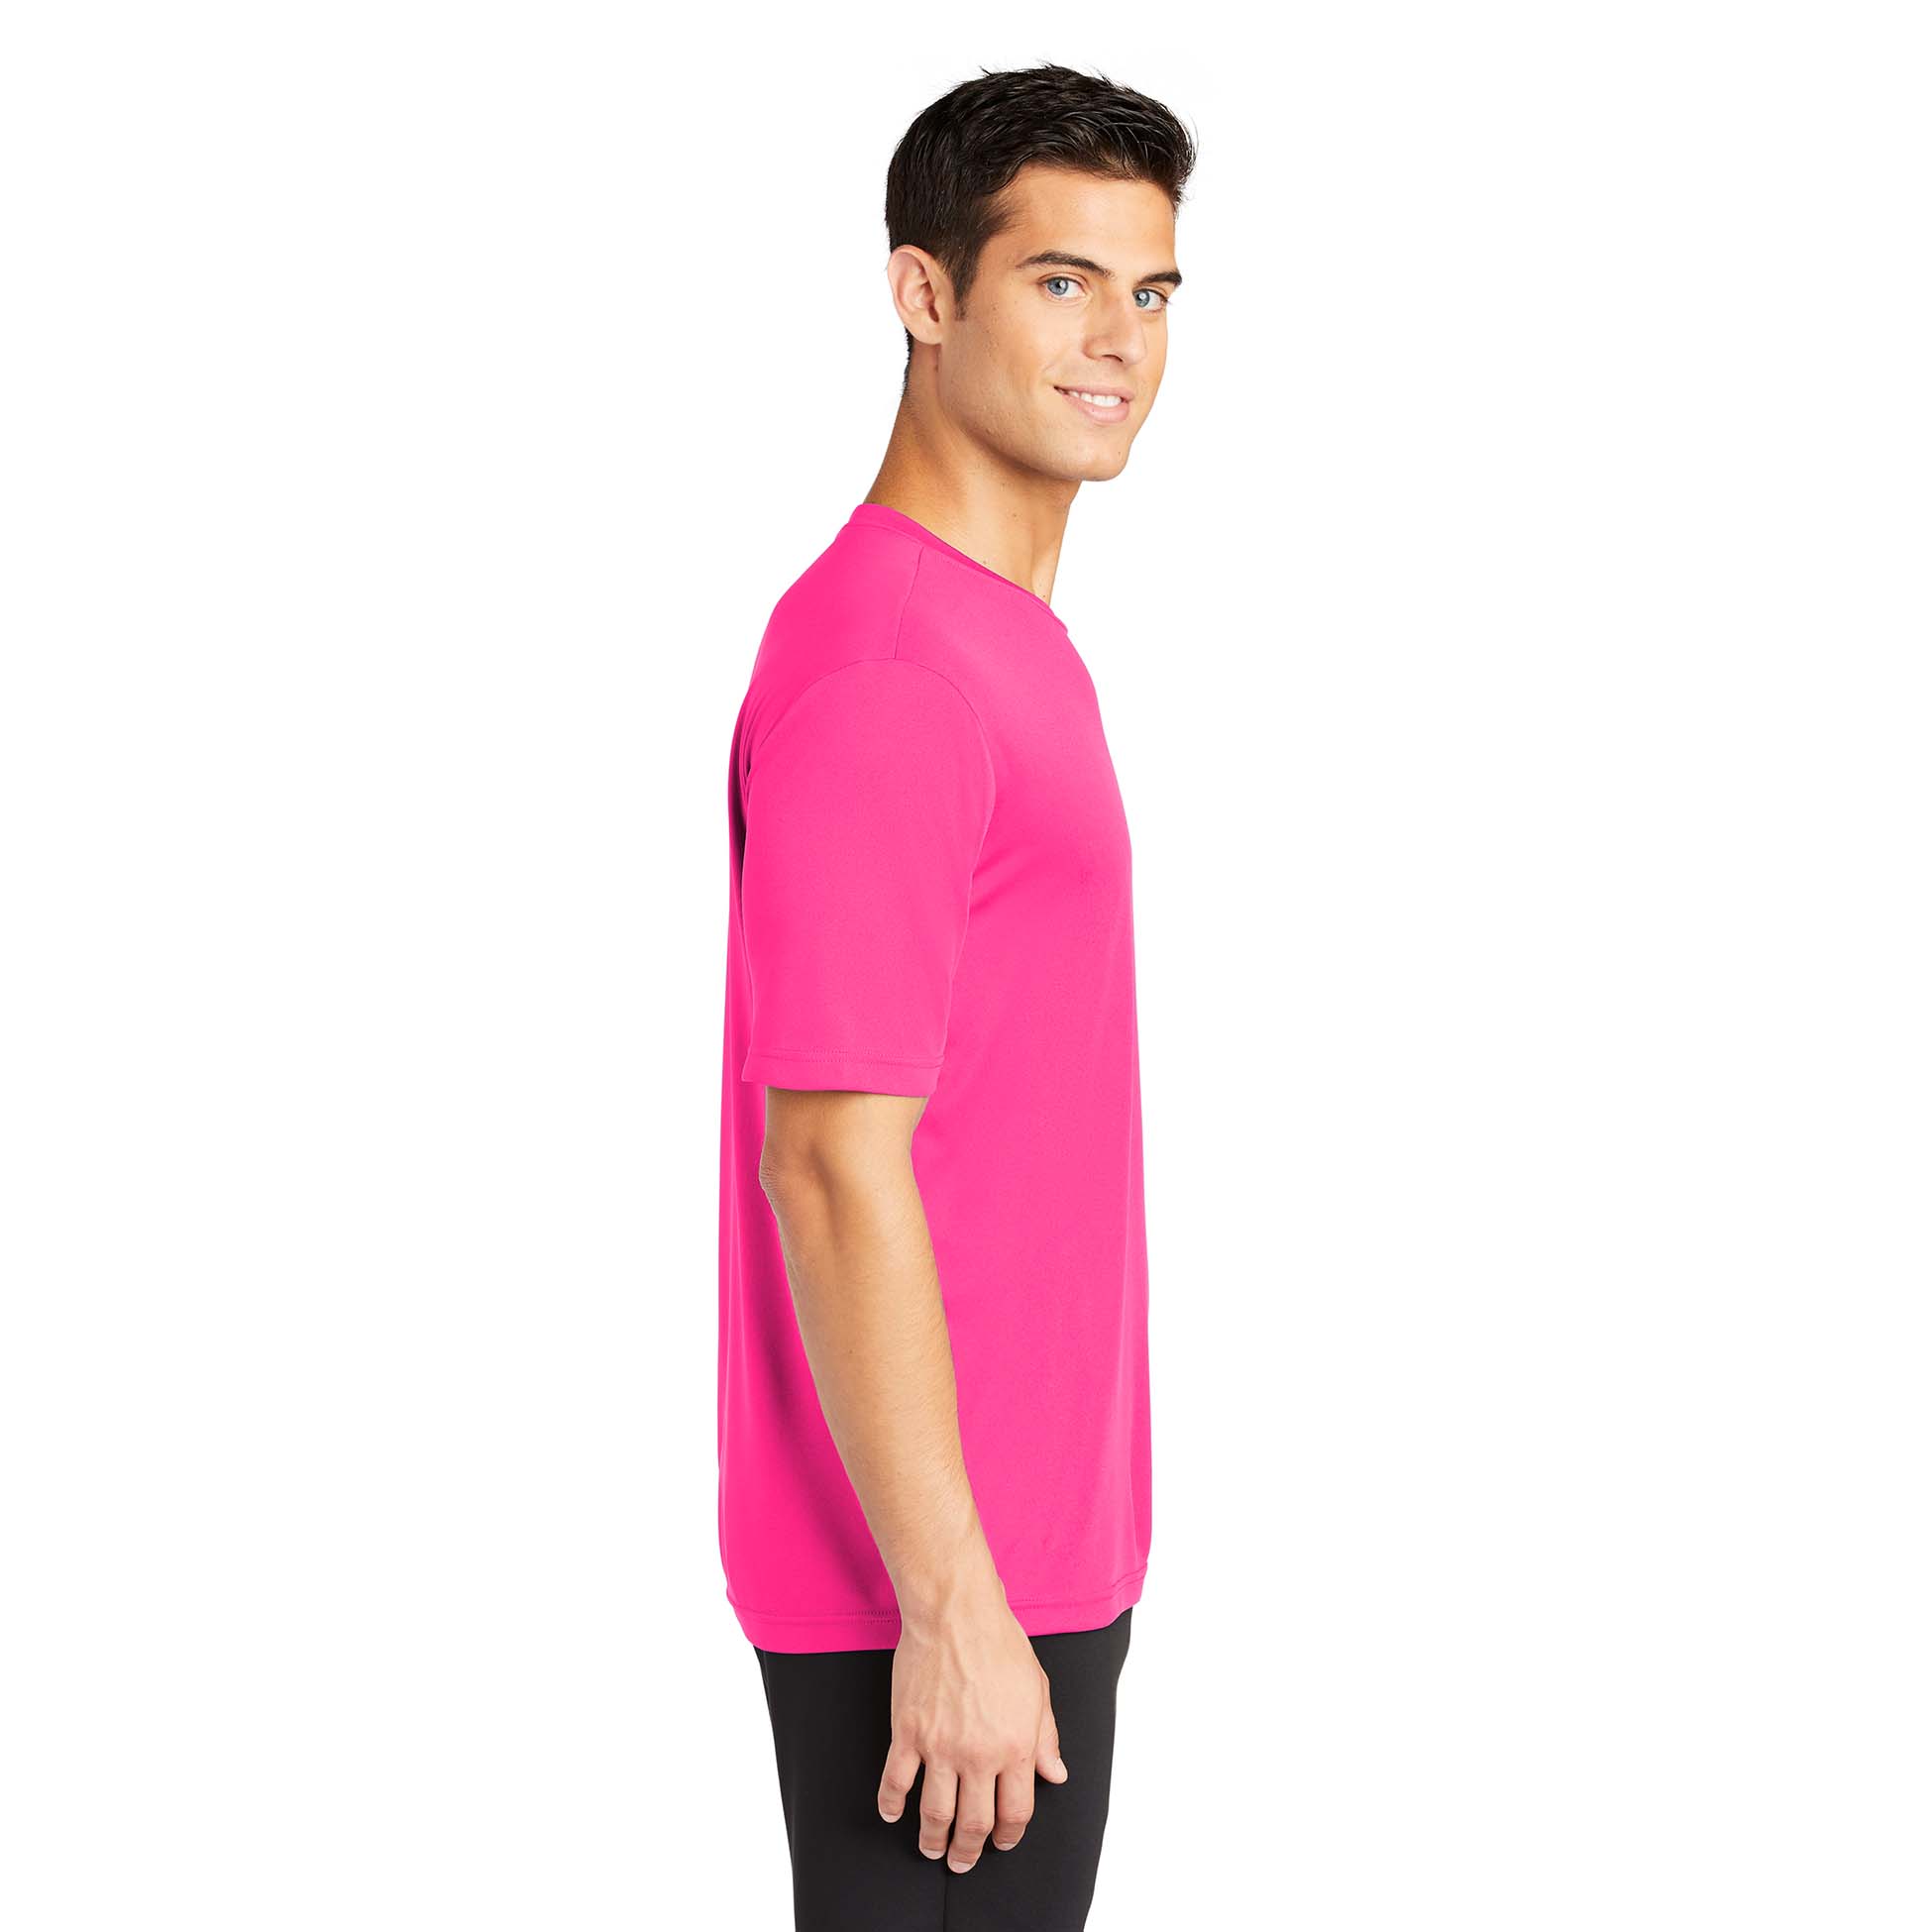 Source Sport-Tek | Full - Pink Neon PosiCharge Tee Competitor ST350